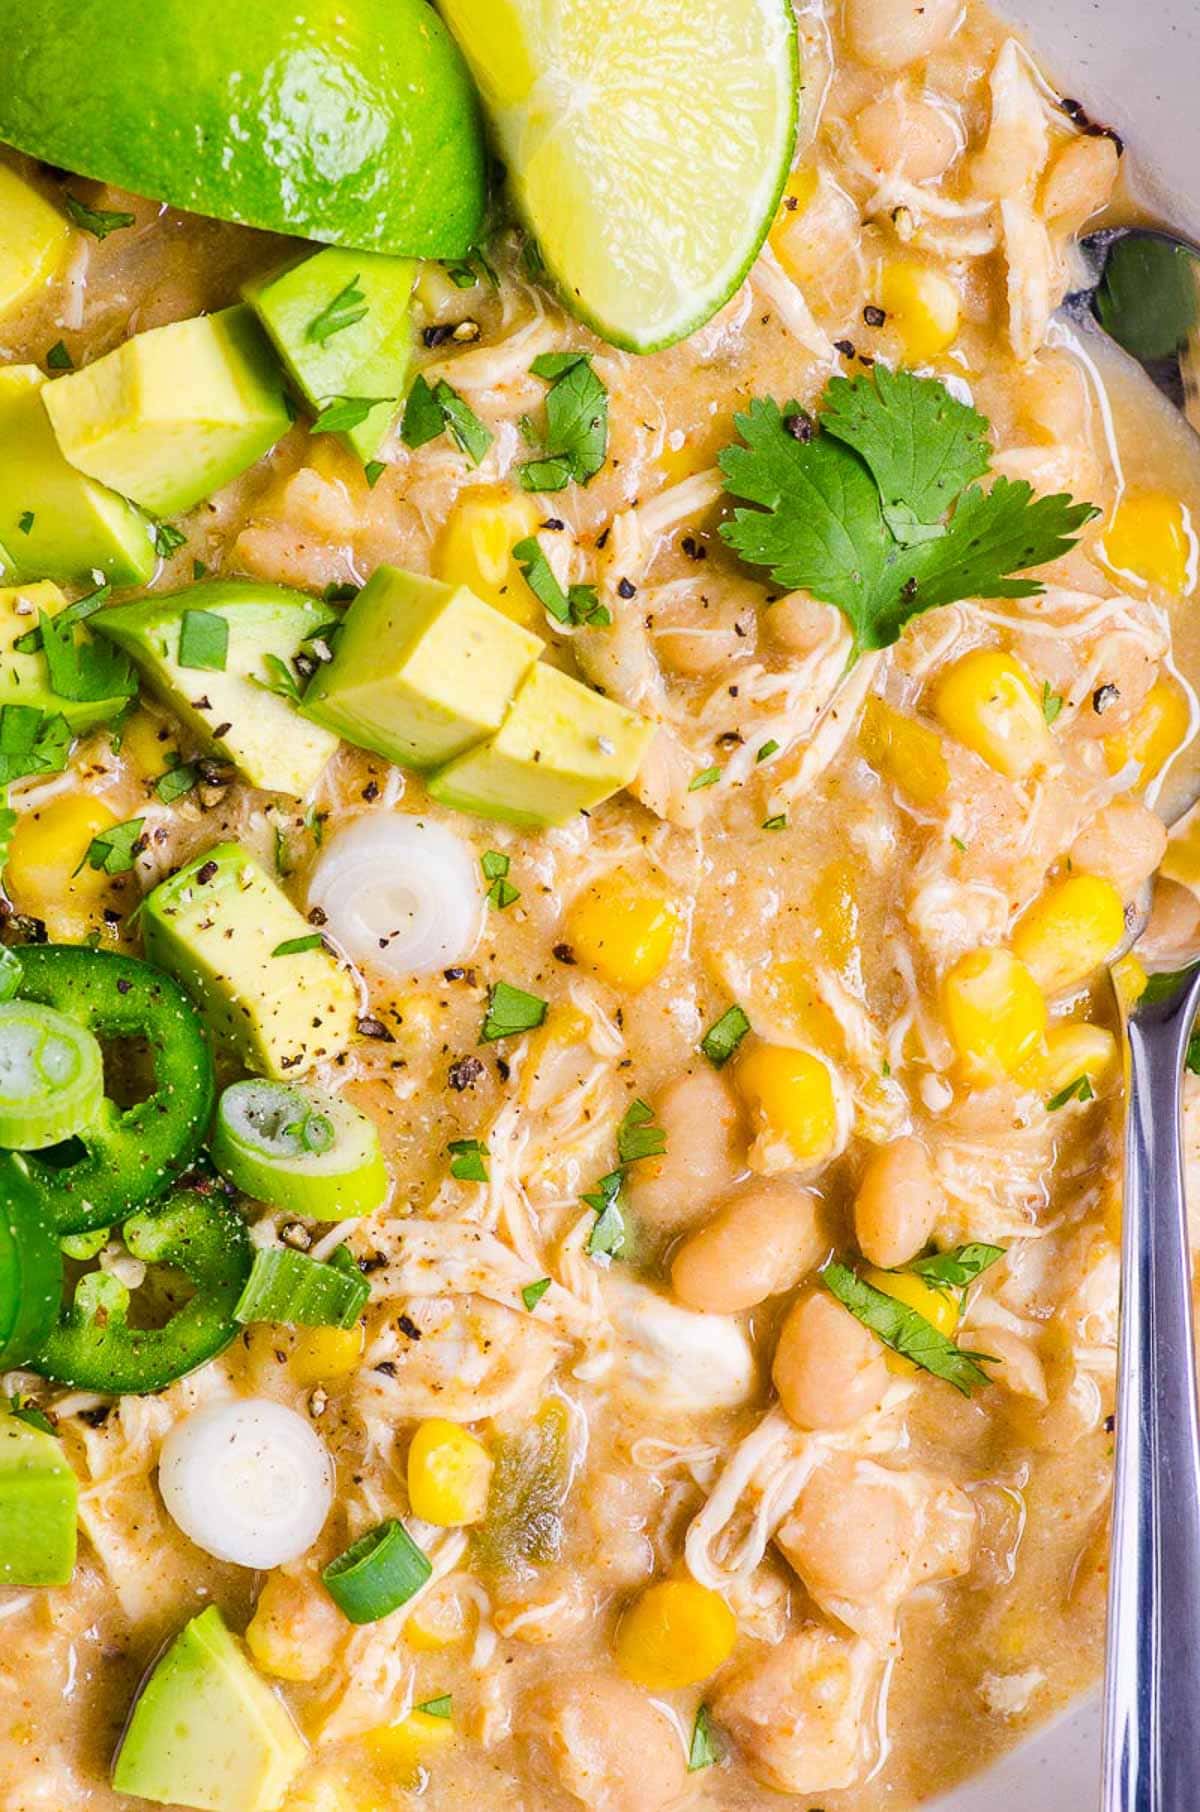 Instant Pot White Chicken Chili garnished with avocado, cilantro, green onion and jalapenos.